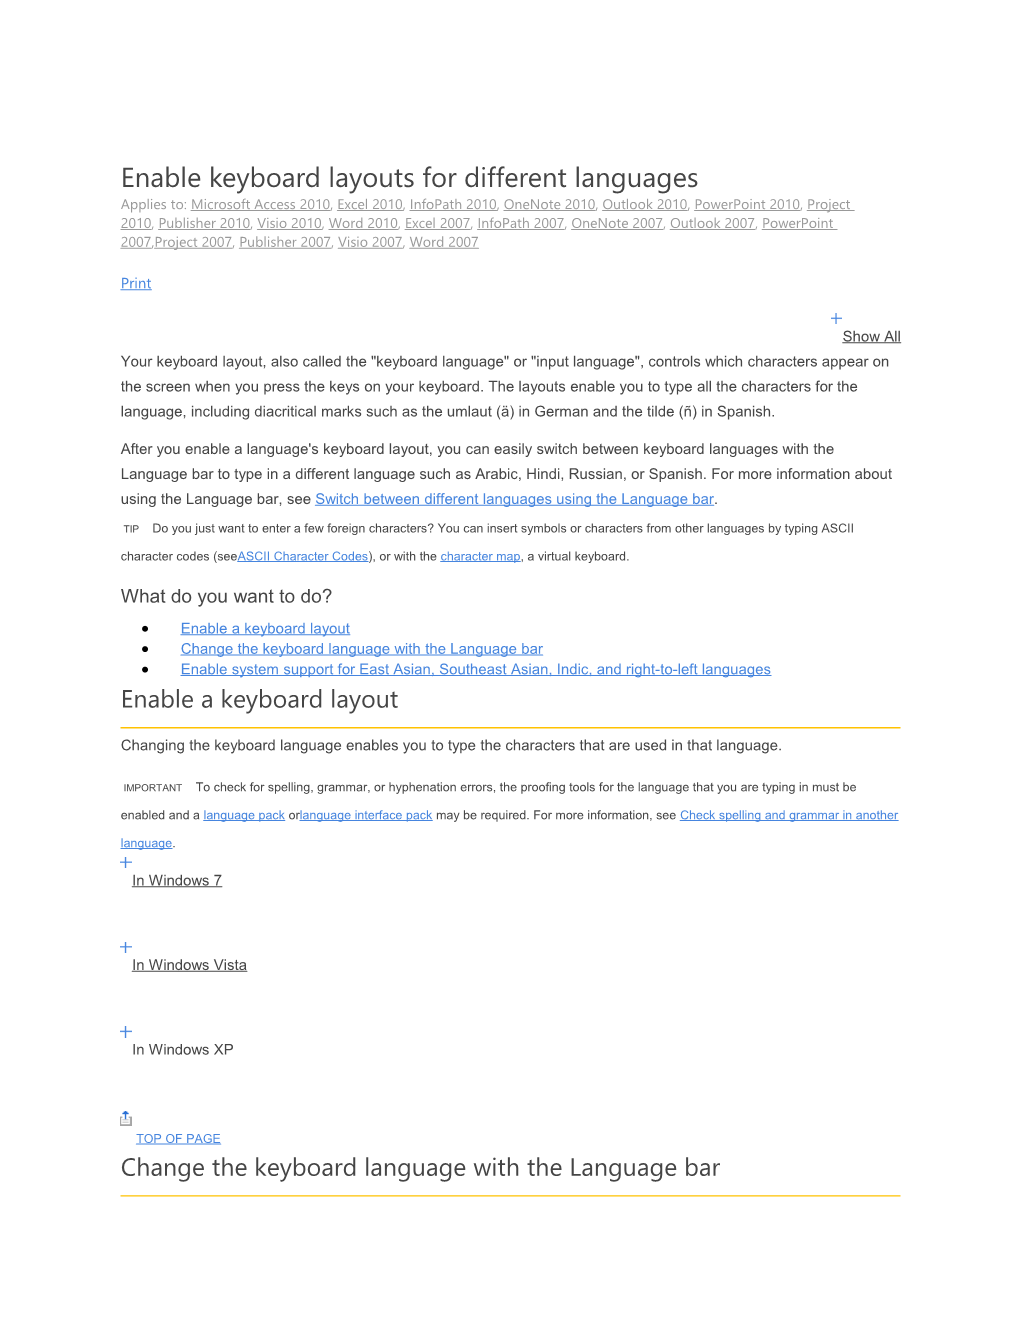 Enable Keyboard Layouts for Different Languages